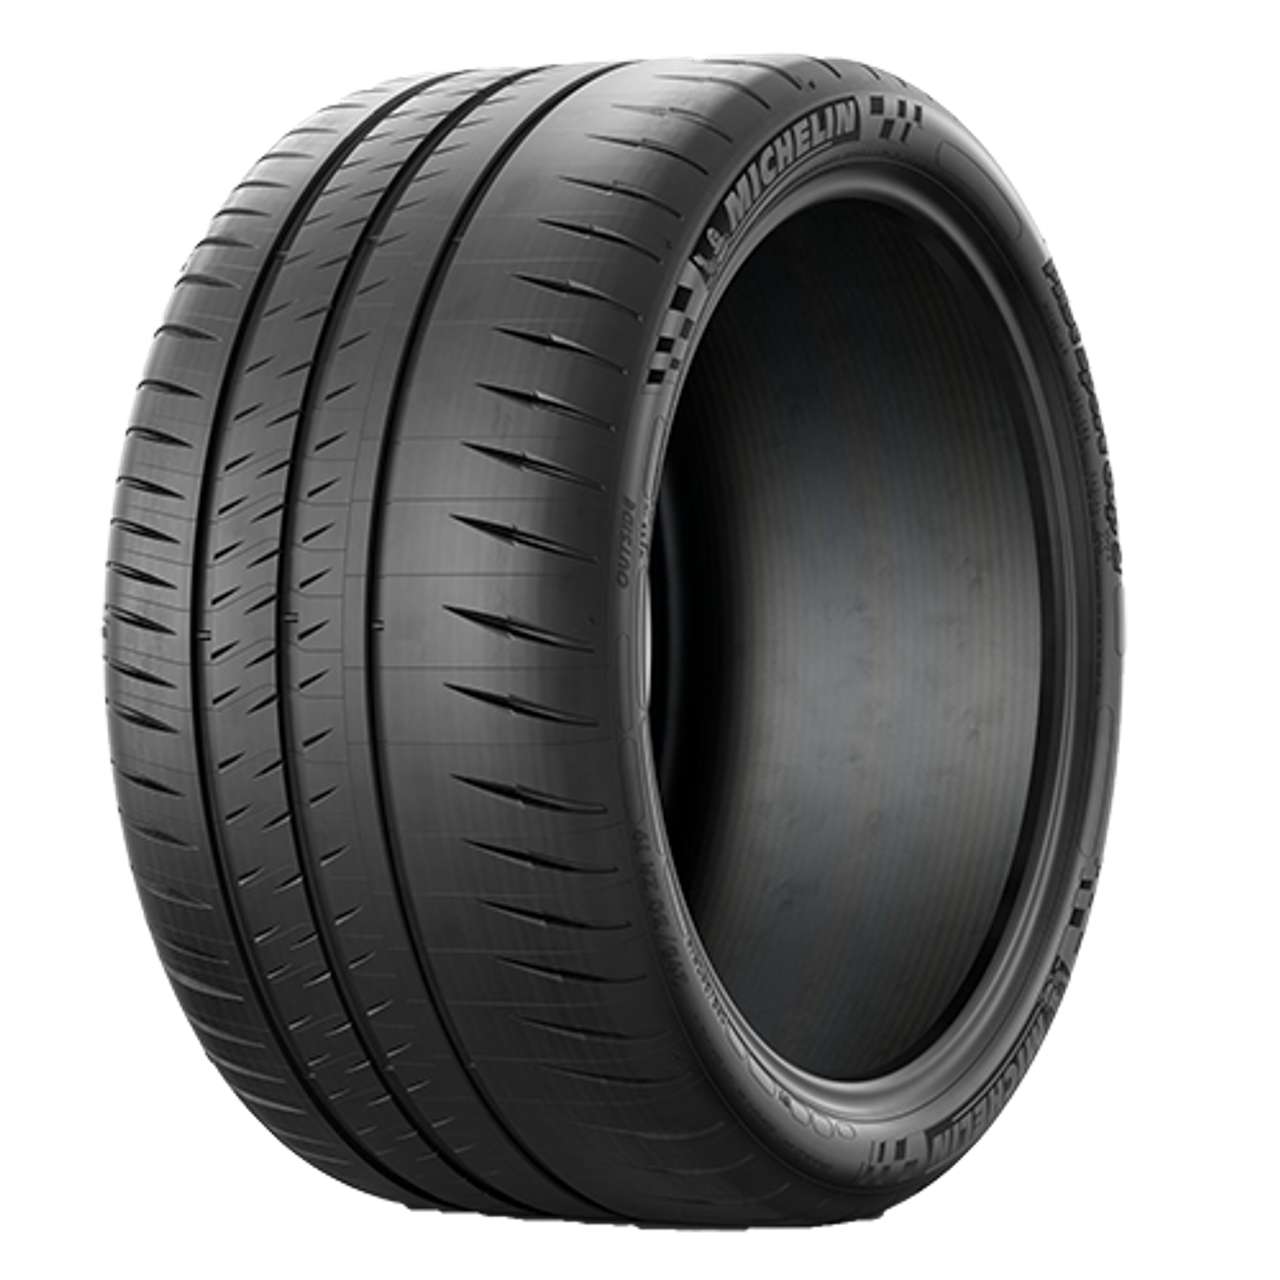 MICHELIN PILOT SPORT CUP 2 R CONNECT (MO1) 275/35ZR20 102(Y) BSW